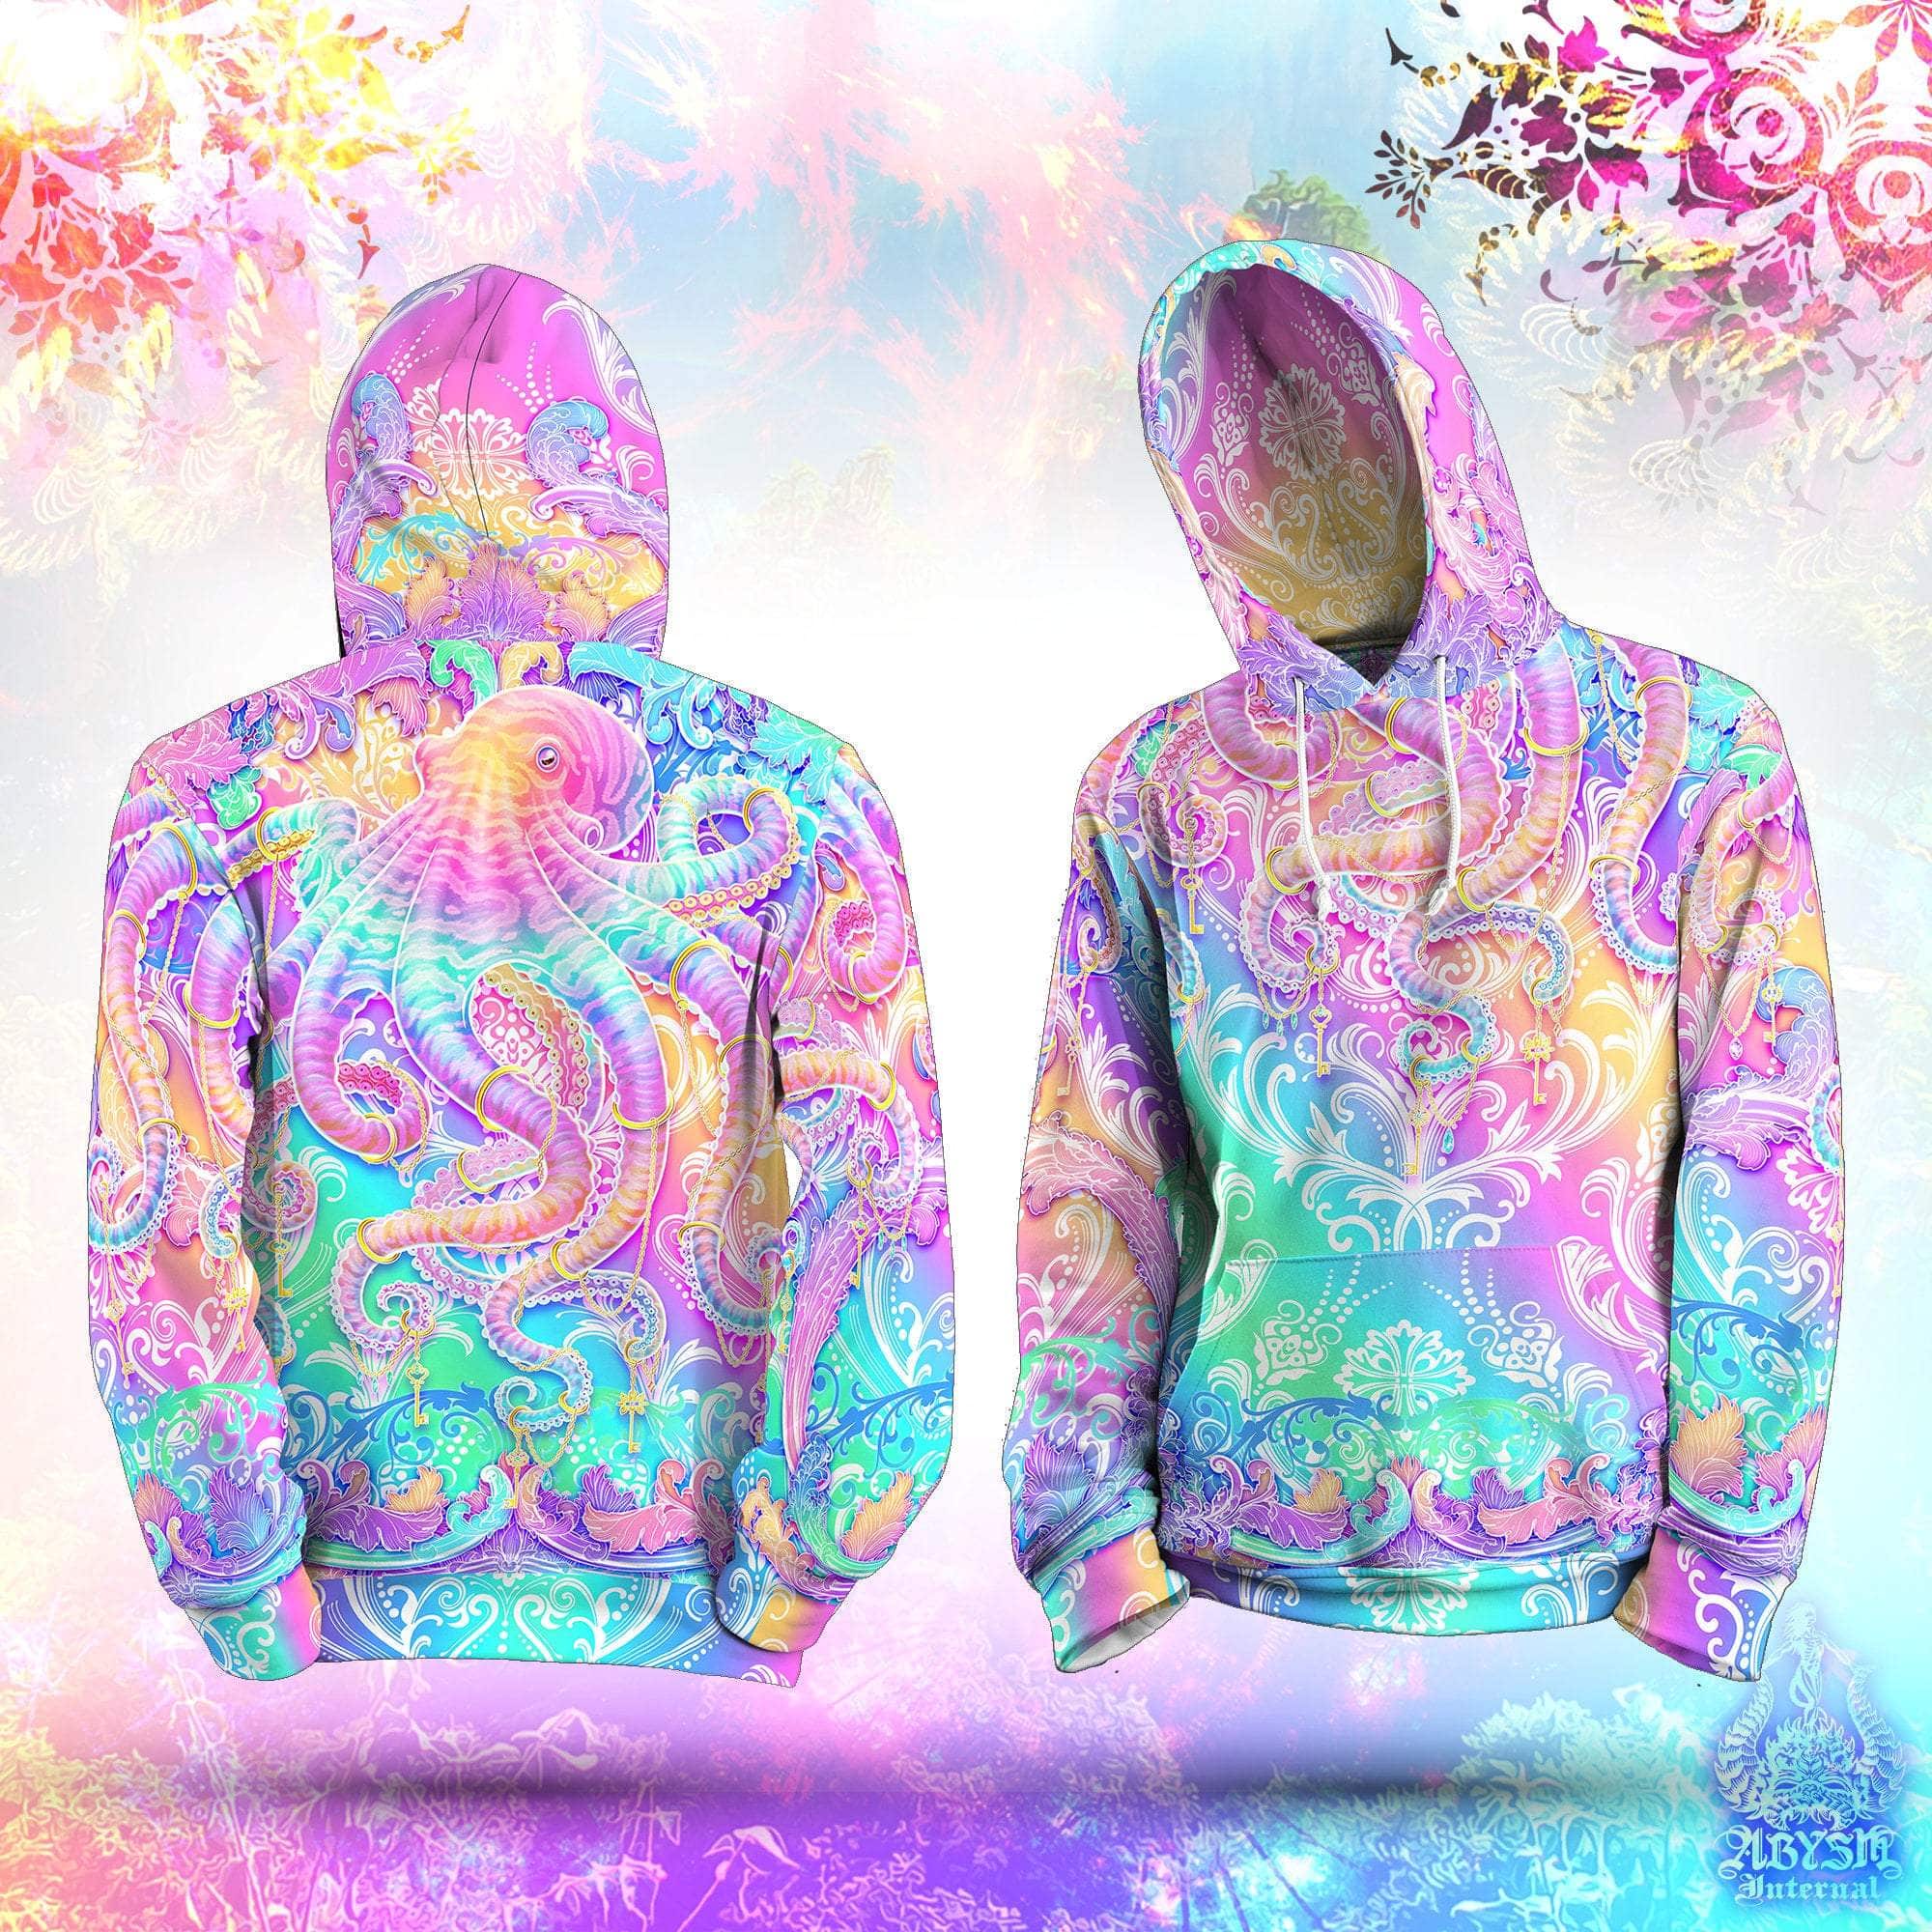 Pastel Hoodie, Aesthetic Streetwear, Rave Outfit, Psychedelic and Trippy Festival Sweater, Holographic Clothing, Unisex - Octopus - Abysm Internal